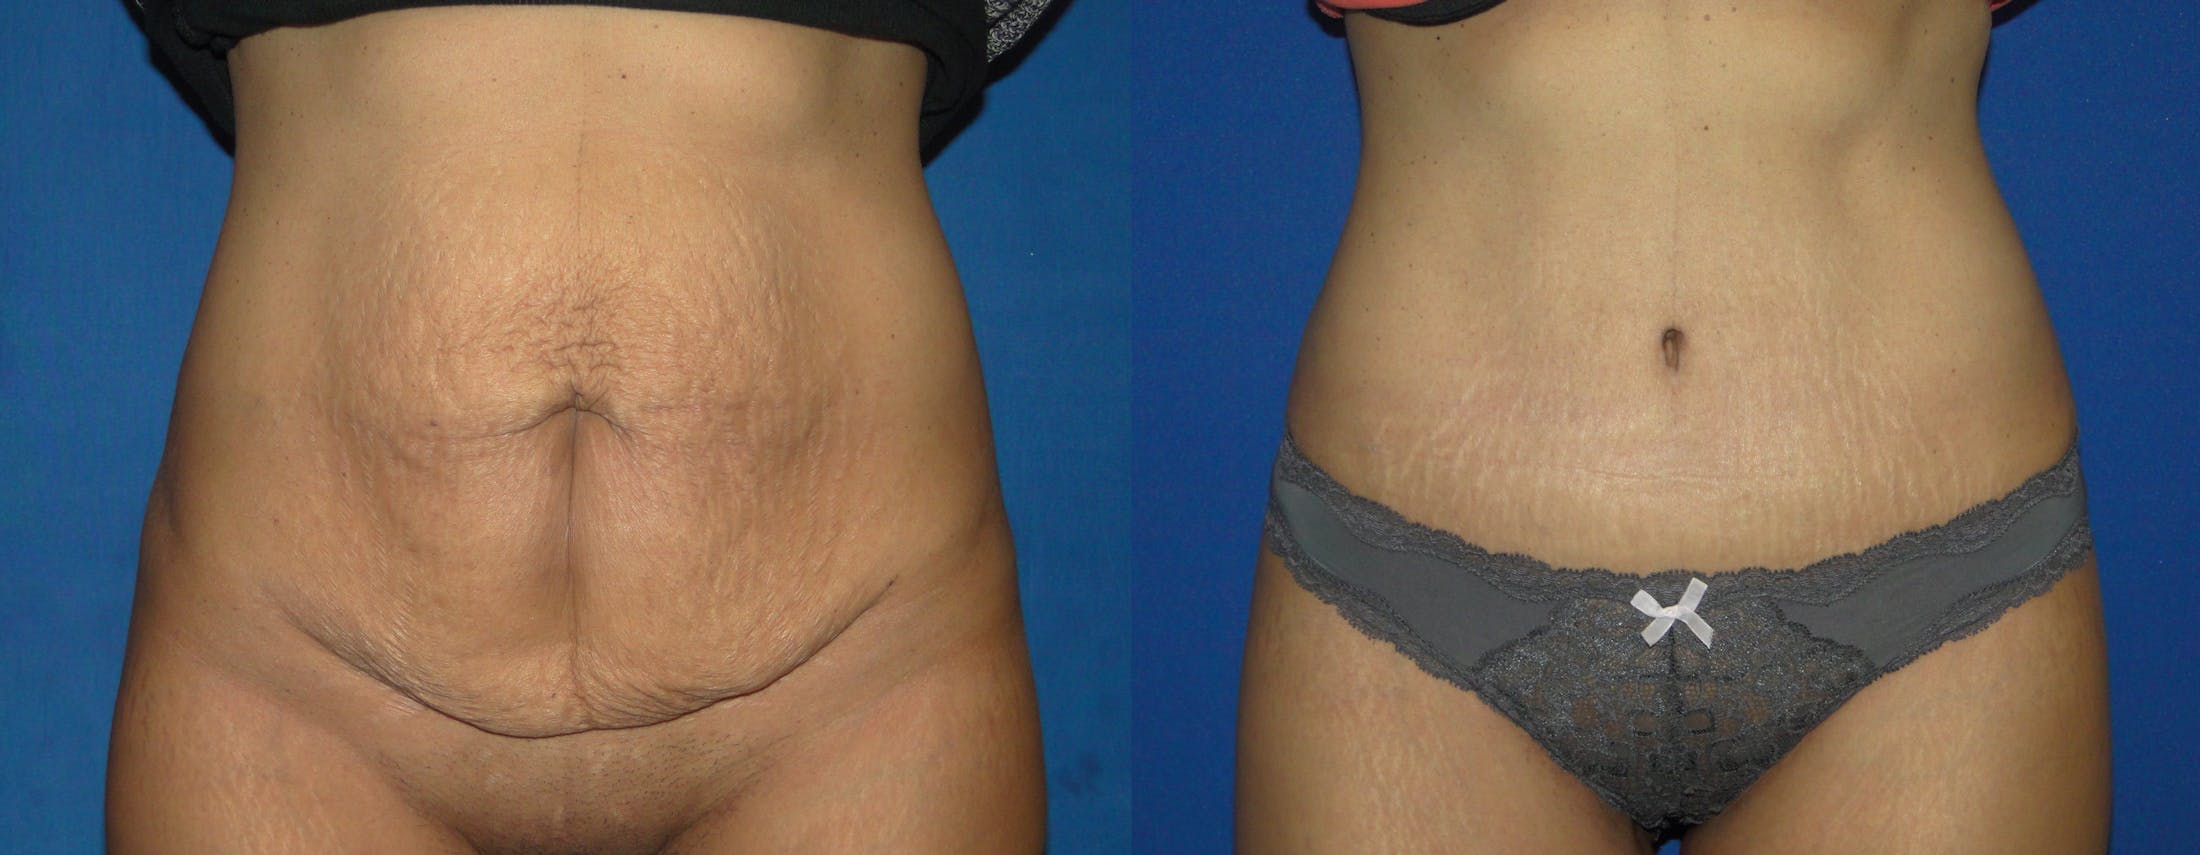 Tummy Tuck Gallery - Patient 74866190 - Image 1